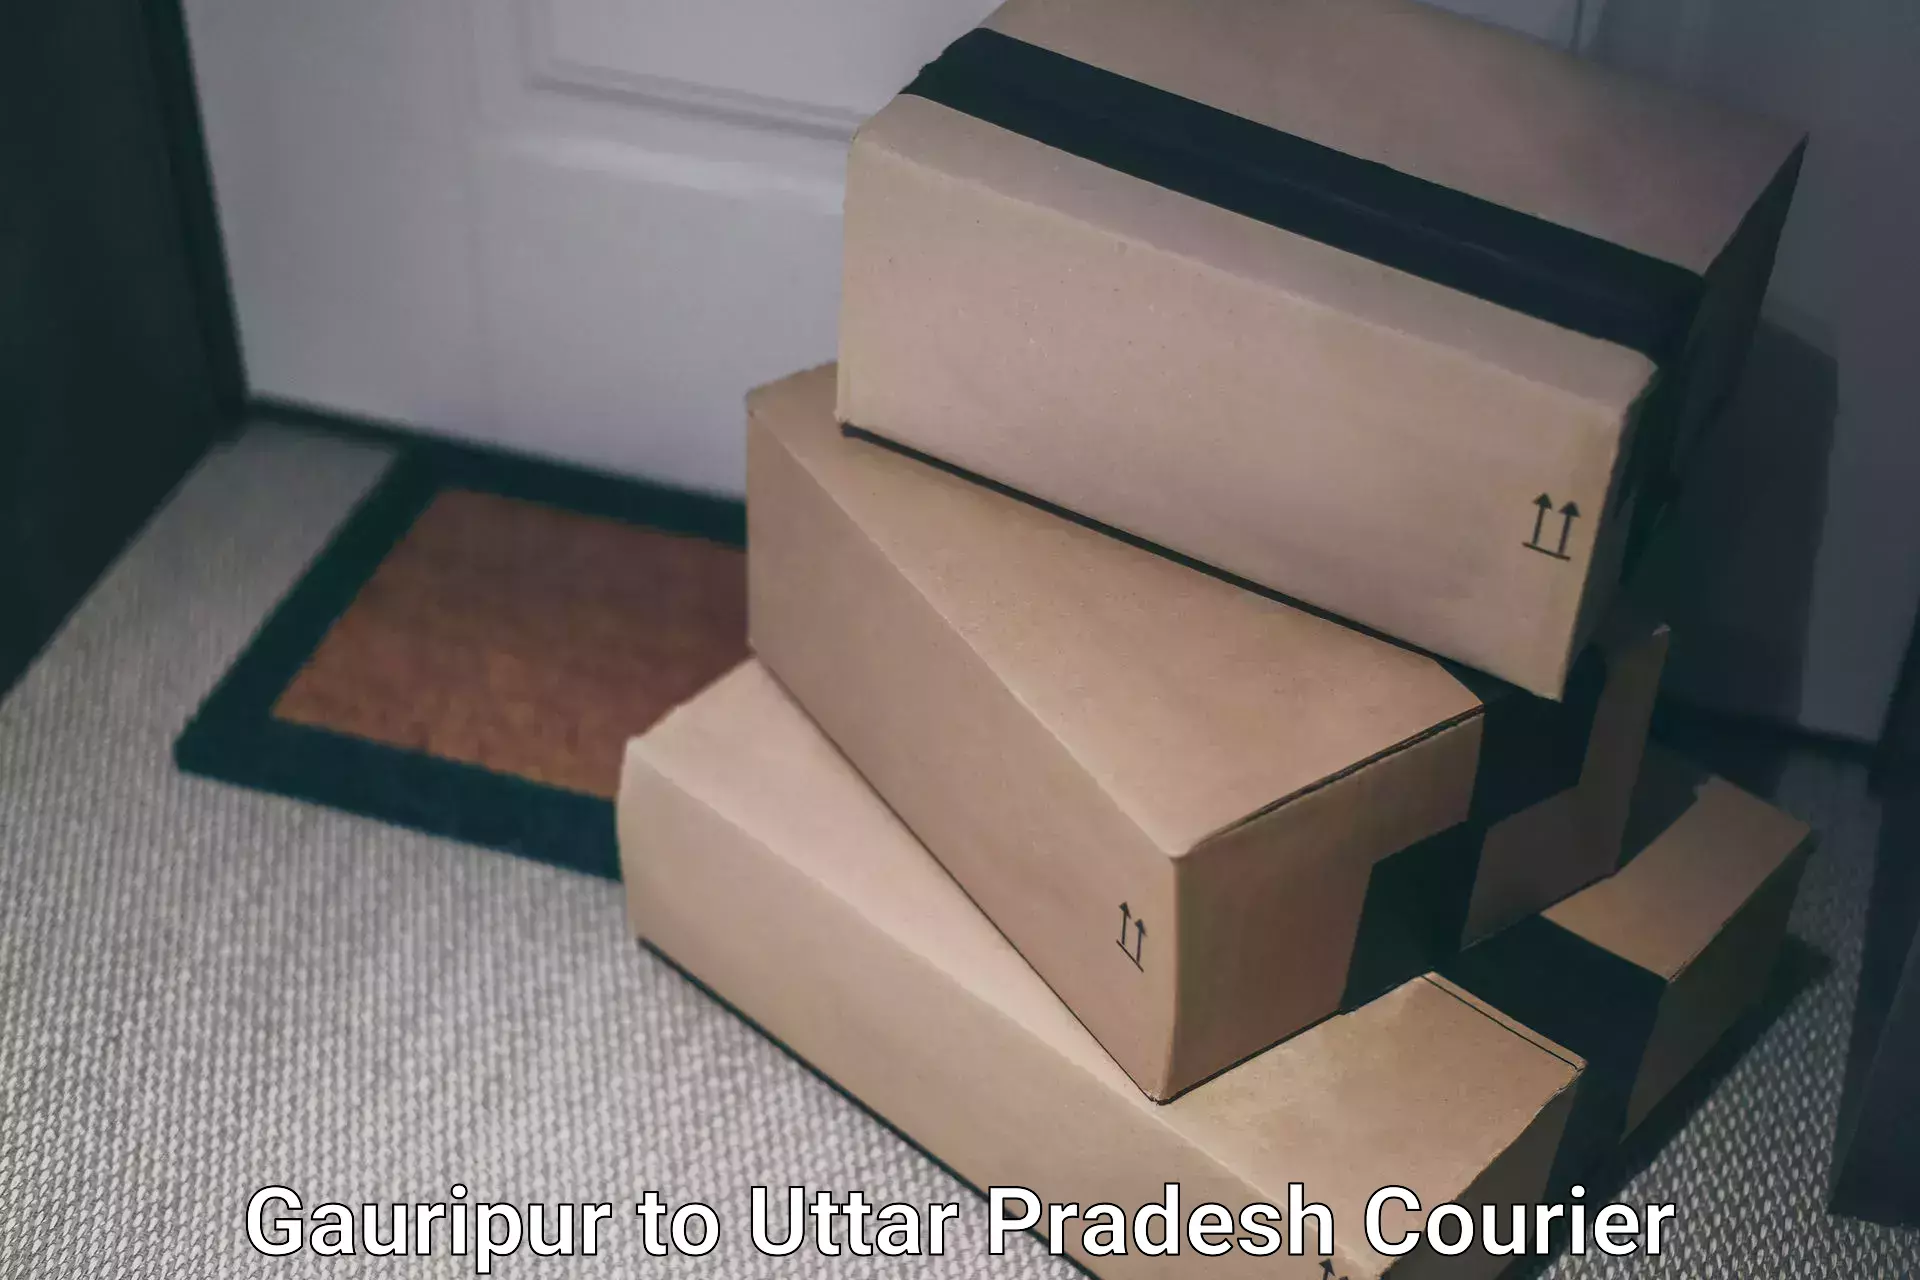 Next-day delivery options Gauripur to Hardoi